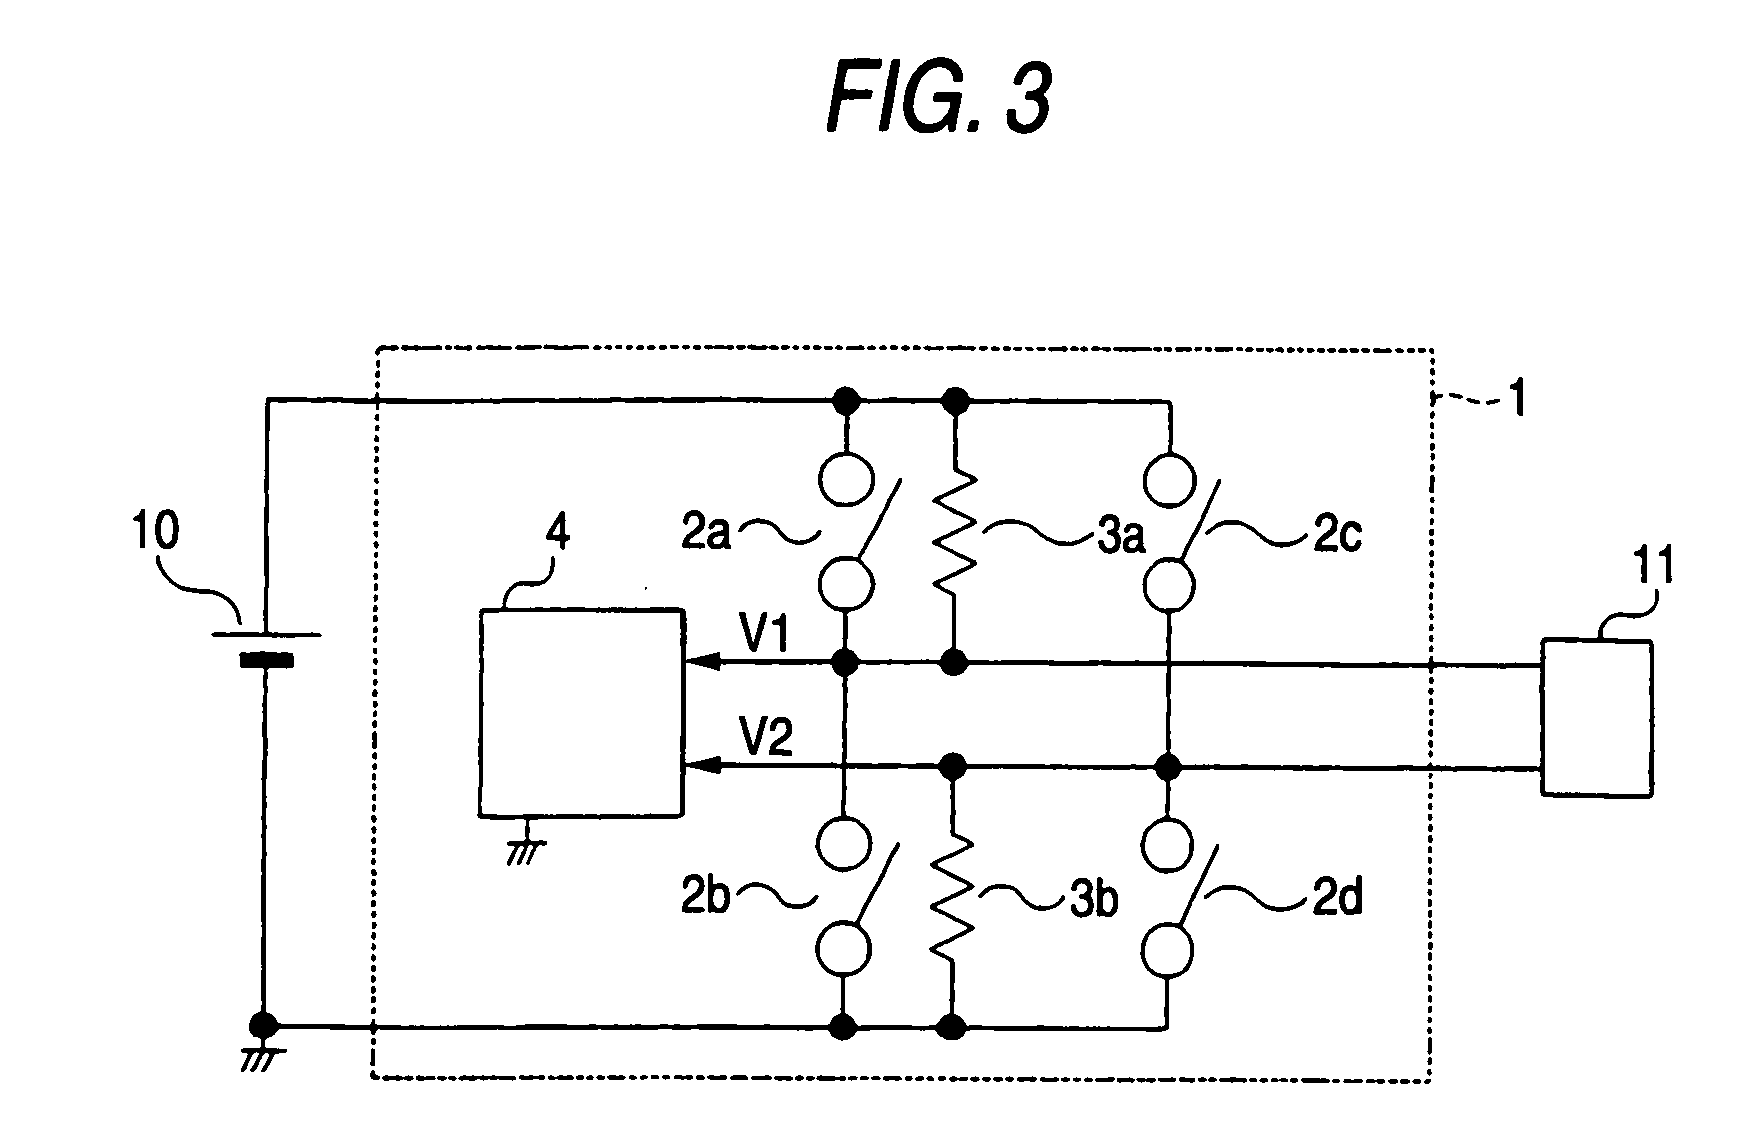 Failure detecting device for a load driving system